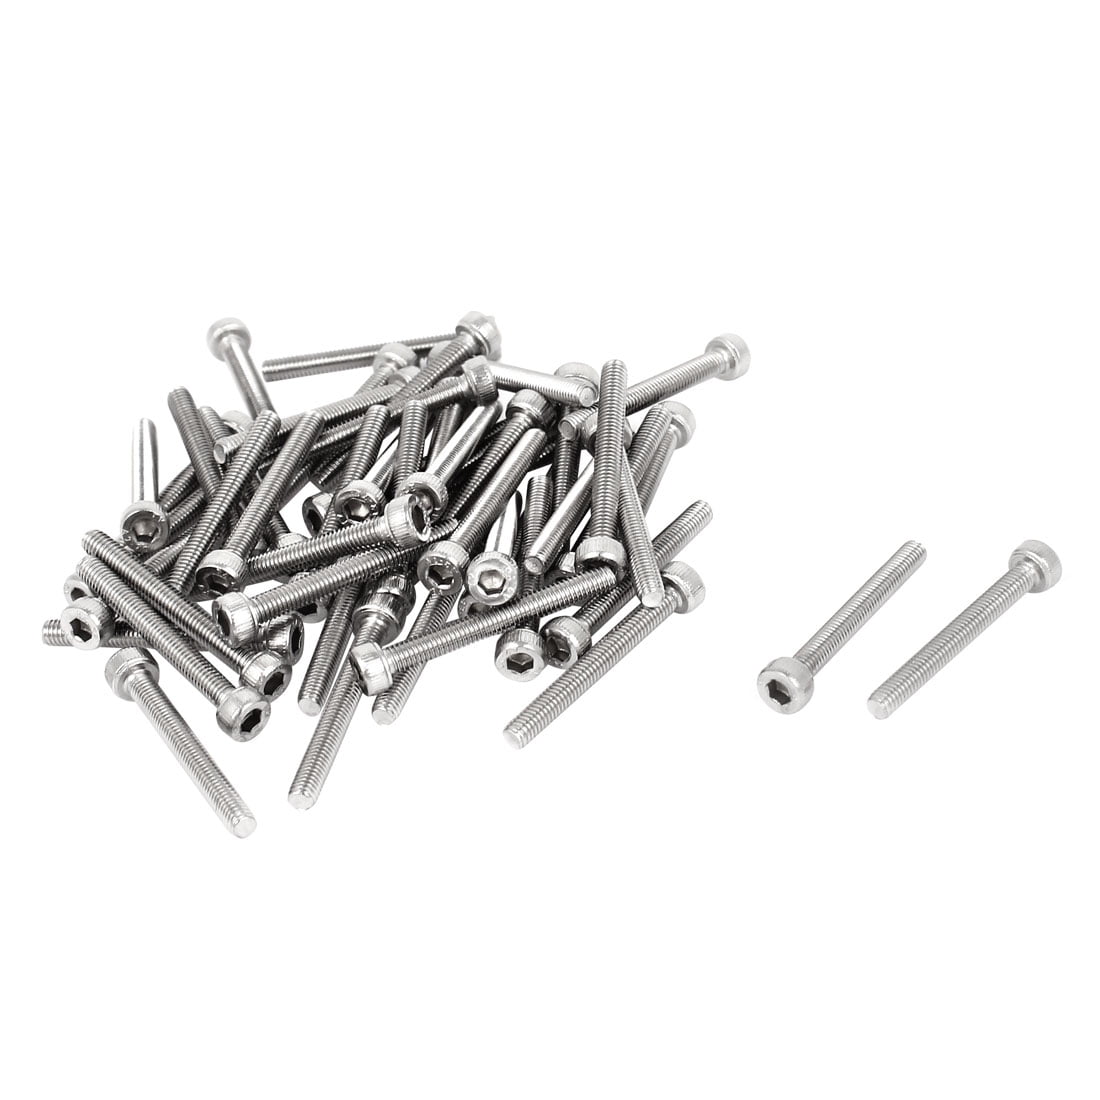 200 Pcs M3x25 mm Self-Tapping Screws 304 Stainless Steel for Home Hardware 